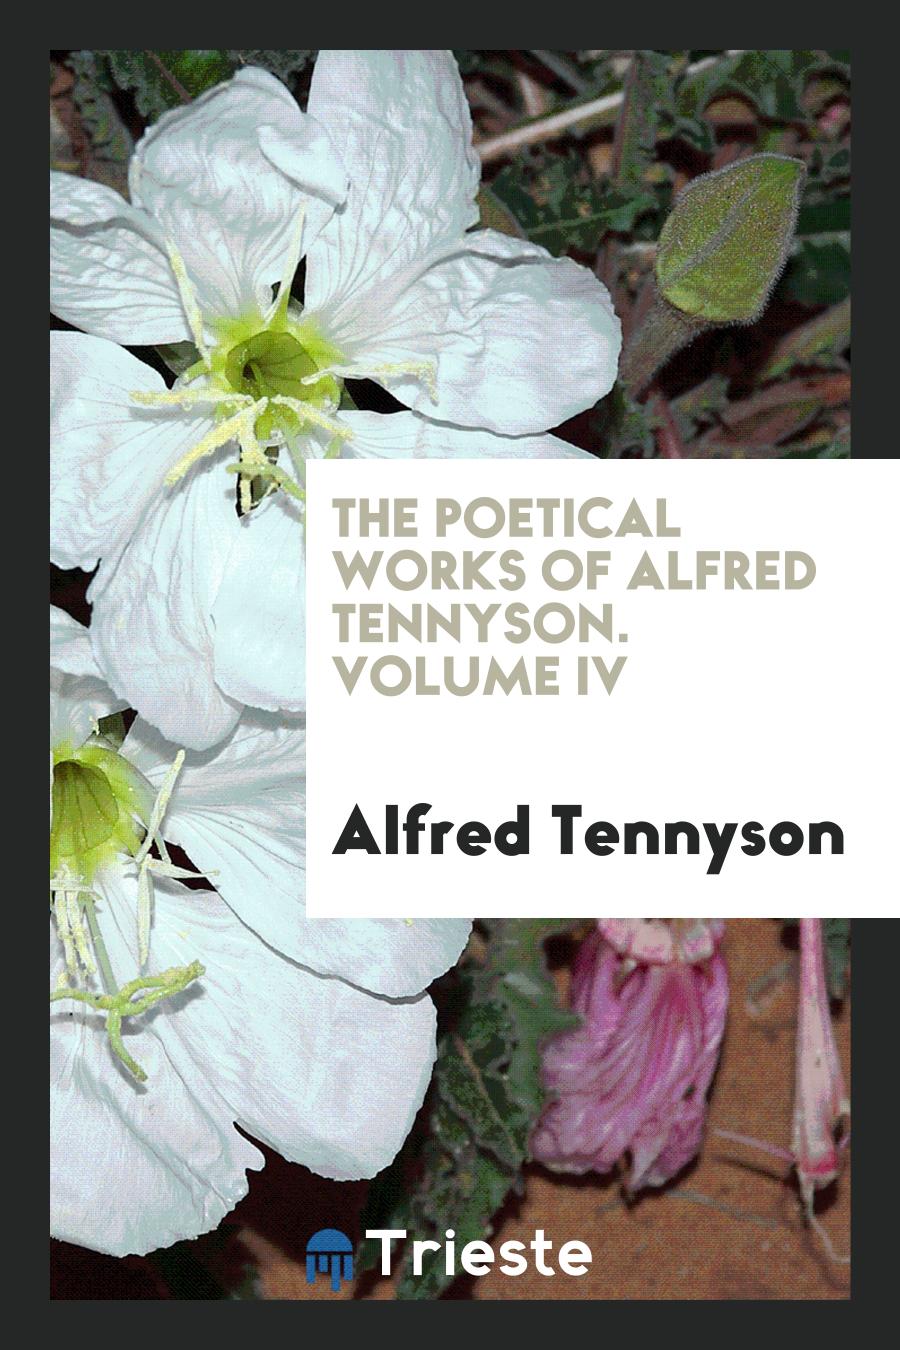 The Poetical Works of Alfred Tennyson. Volume IV